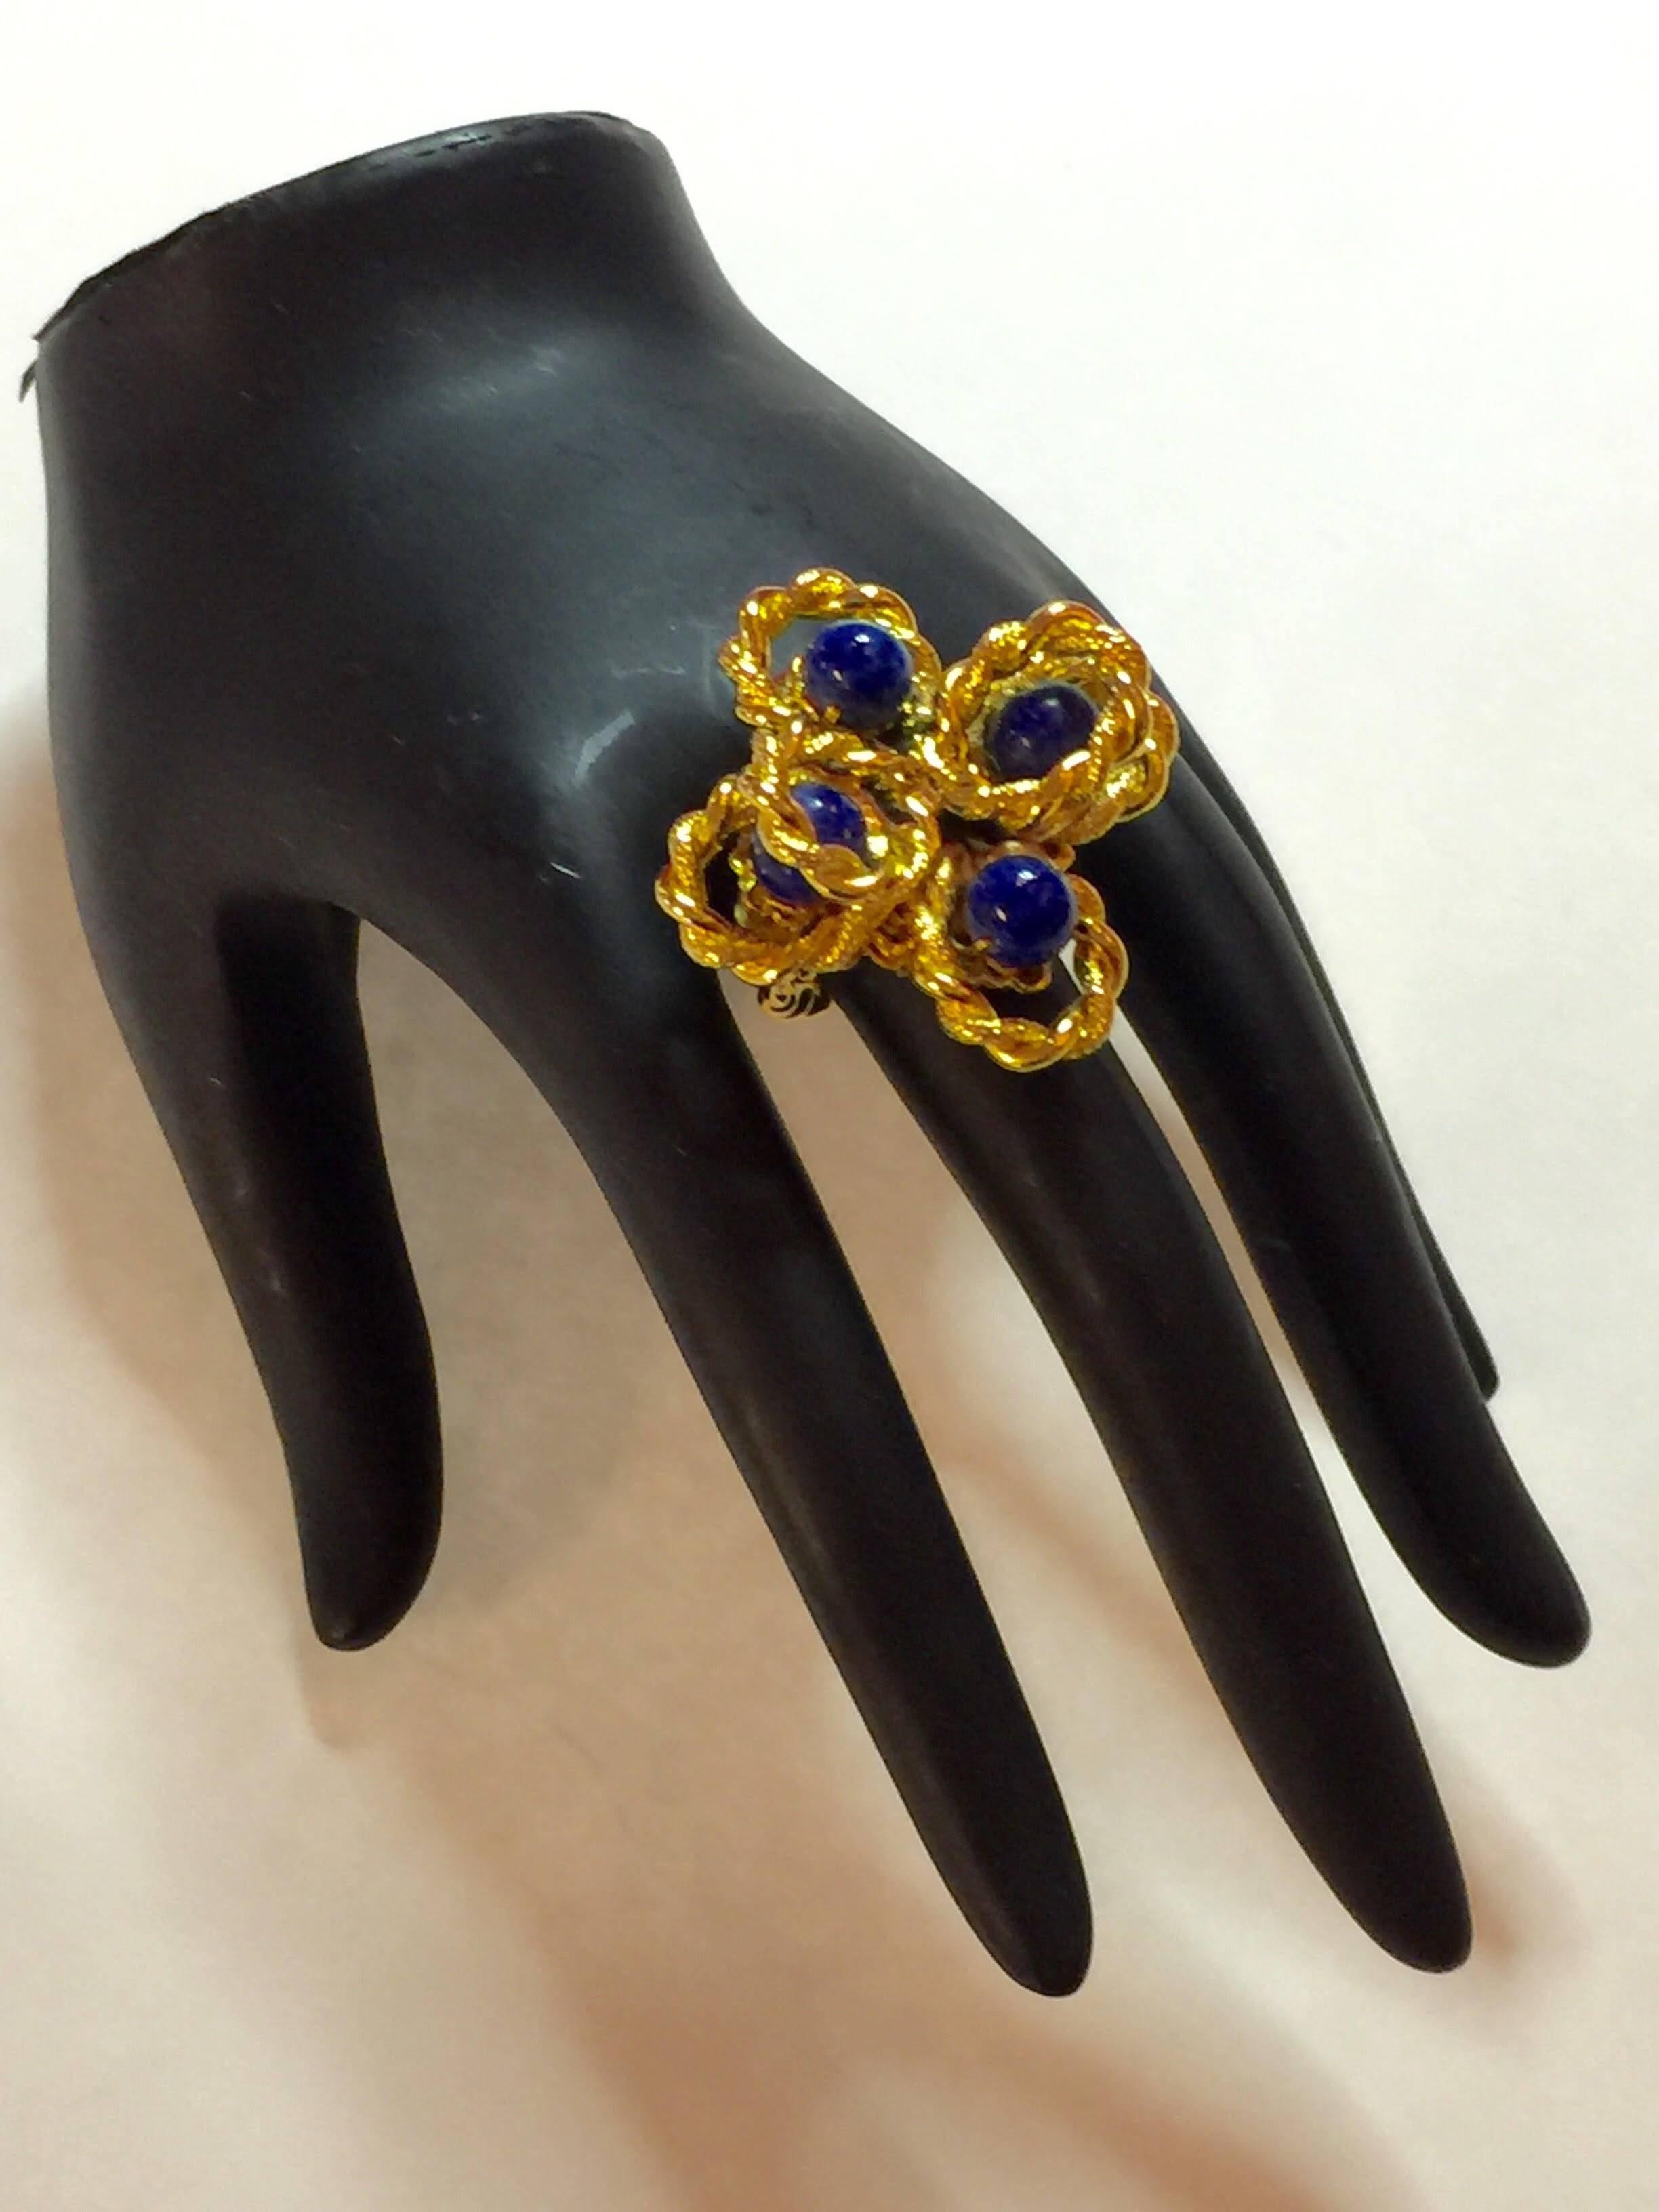 Offered here is this 1960's William DeLillo Faux Lapis Goldtone Fits EVERYONE Cocktail Ring. In classic late 60s braided/molten gold style, this ring has an open back shank and can be self-custom bent to fit most wearers. The double braided and